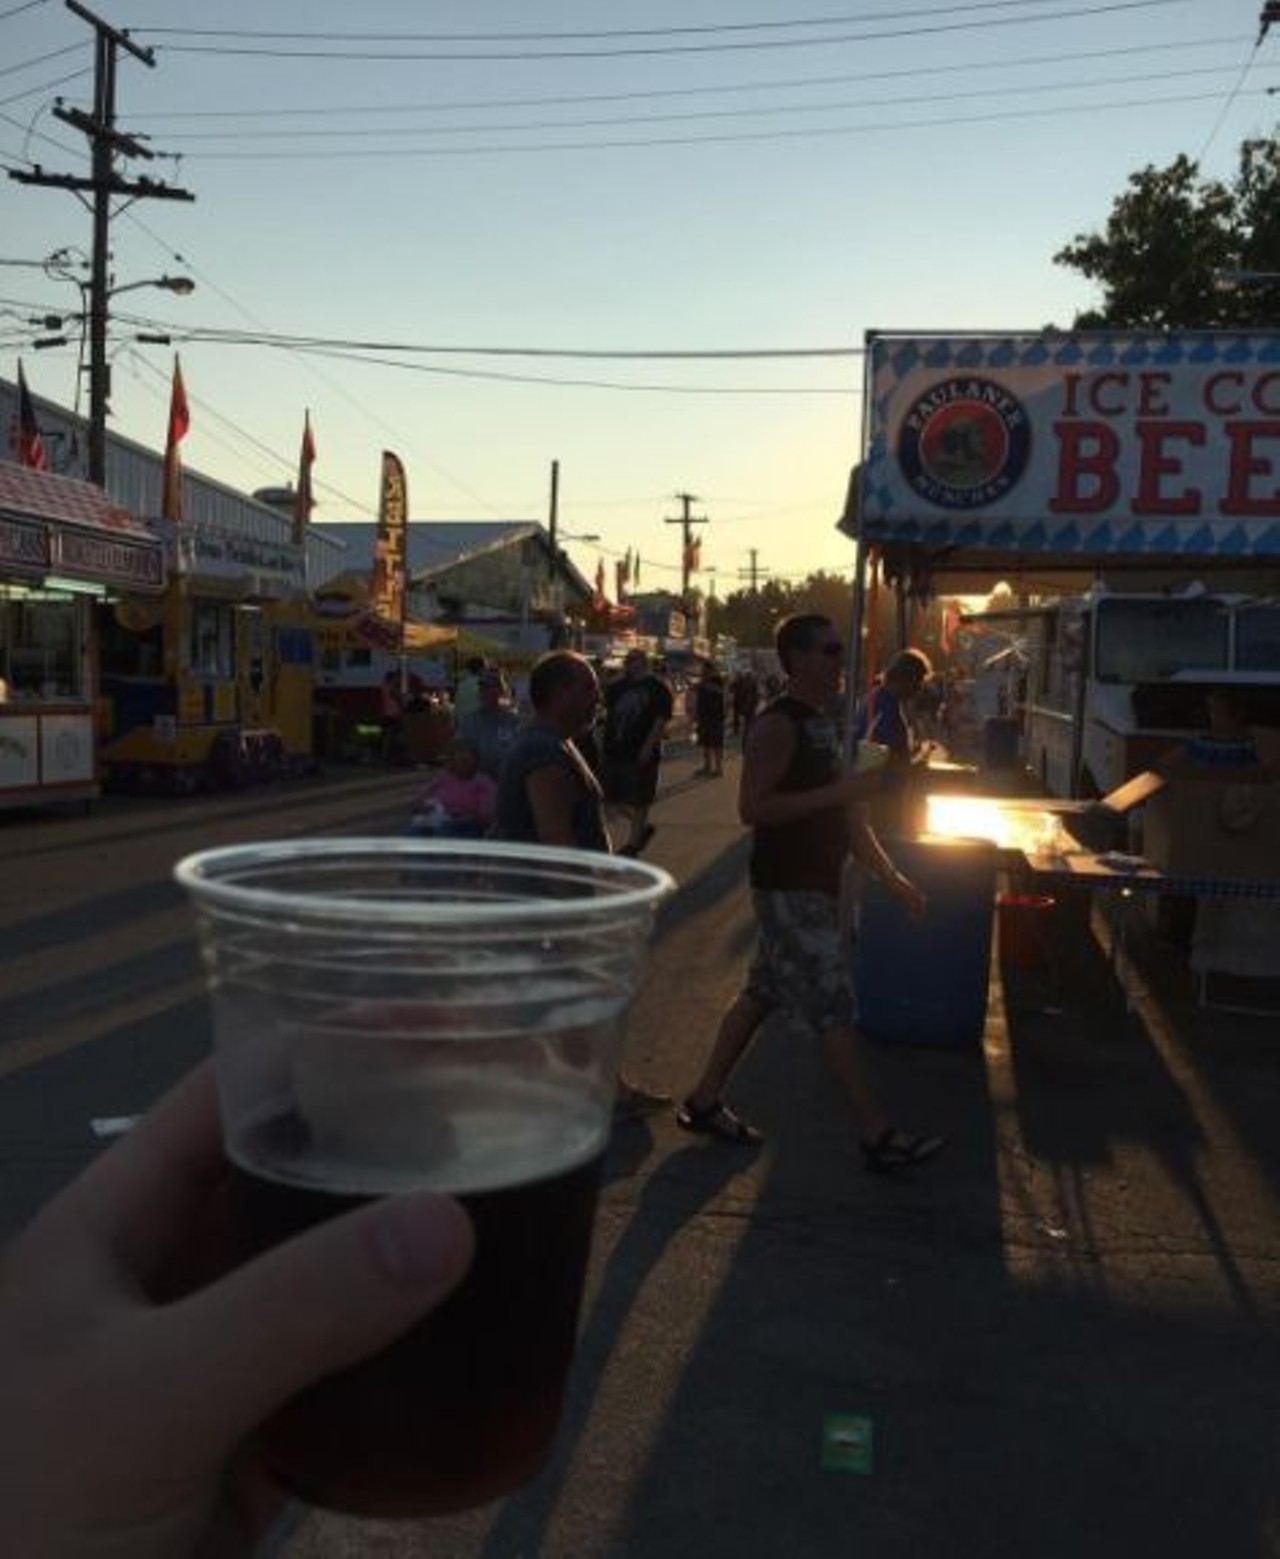  Irish Cultural Festival
July 21-23
Cuyahoga County Fairgrounds
The west side has the highest Irish population in Ohio, according to census approximations, so Cleveland is an ideal place to celebrate Irish heritage and culture.
Photo via g_vasiliev/Instagram